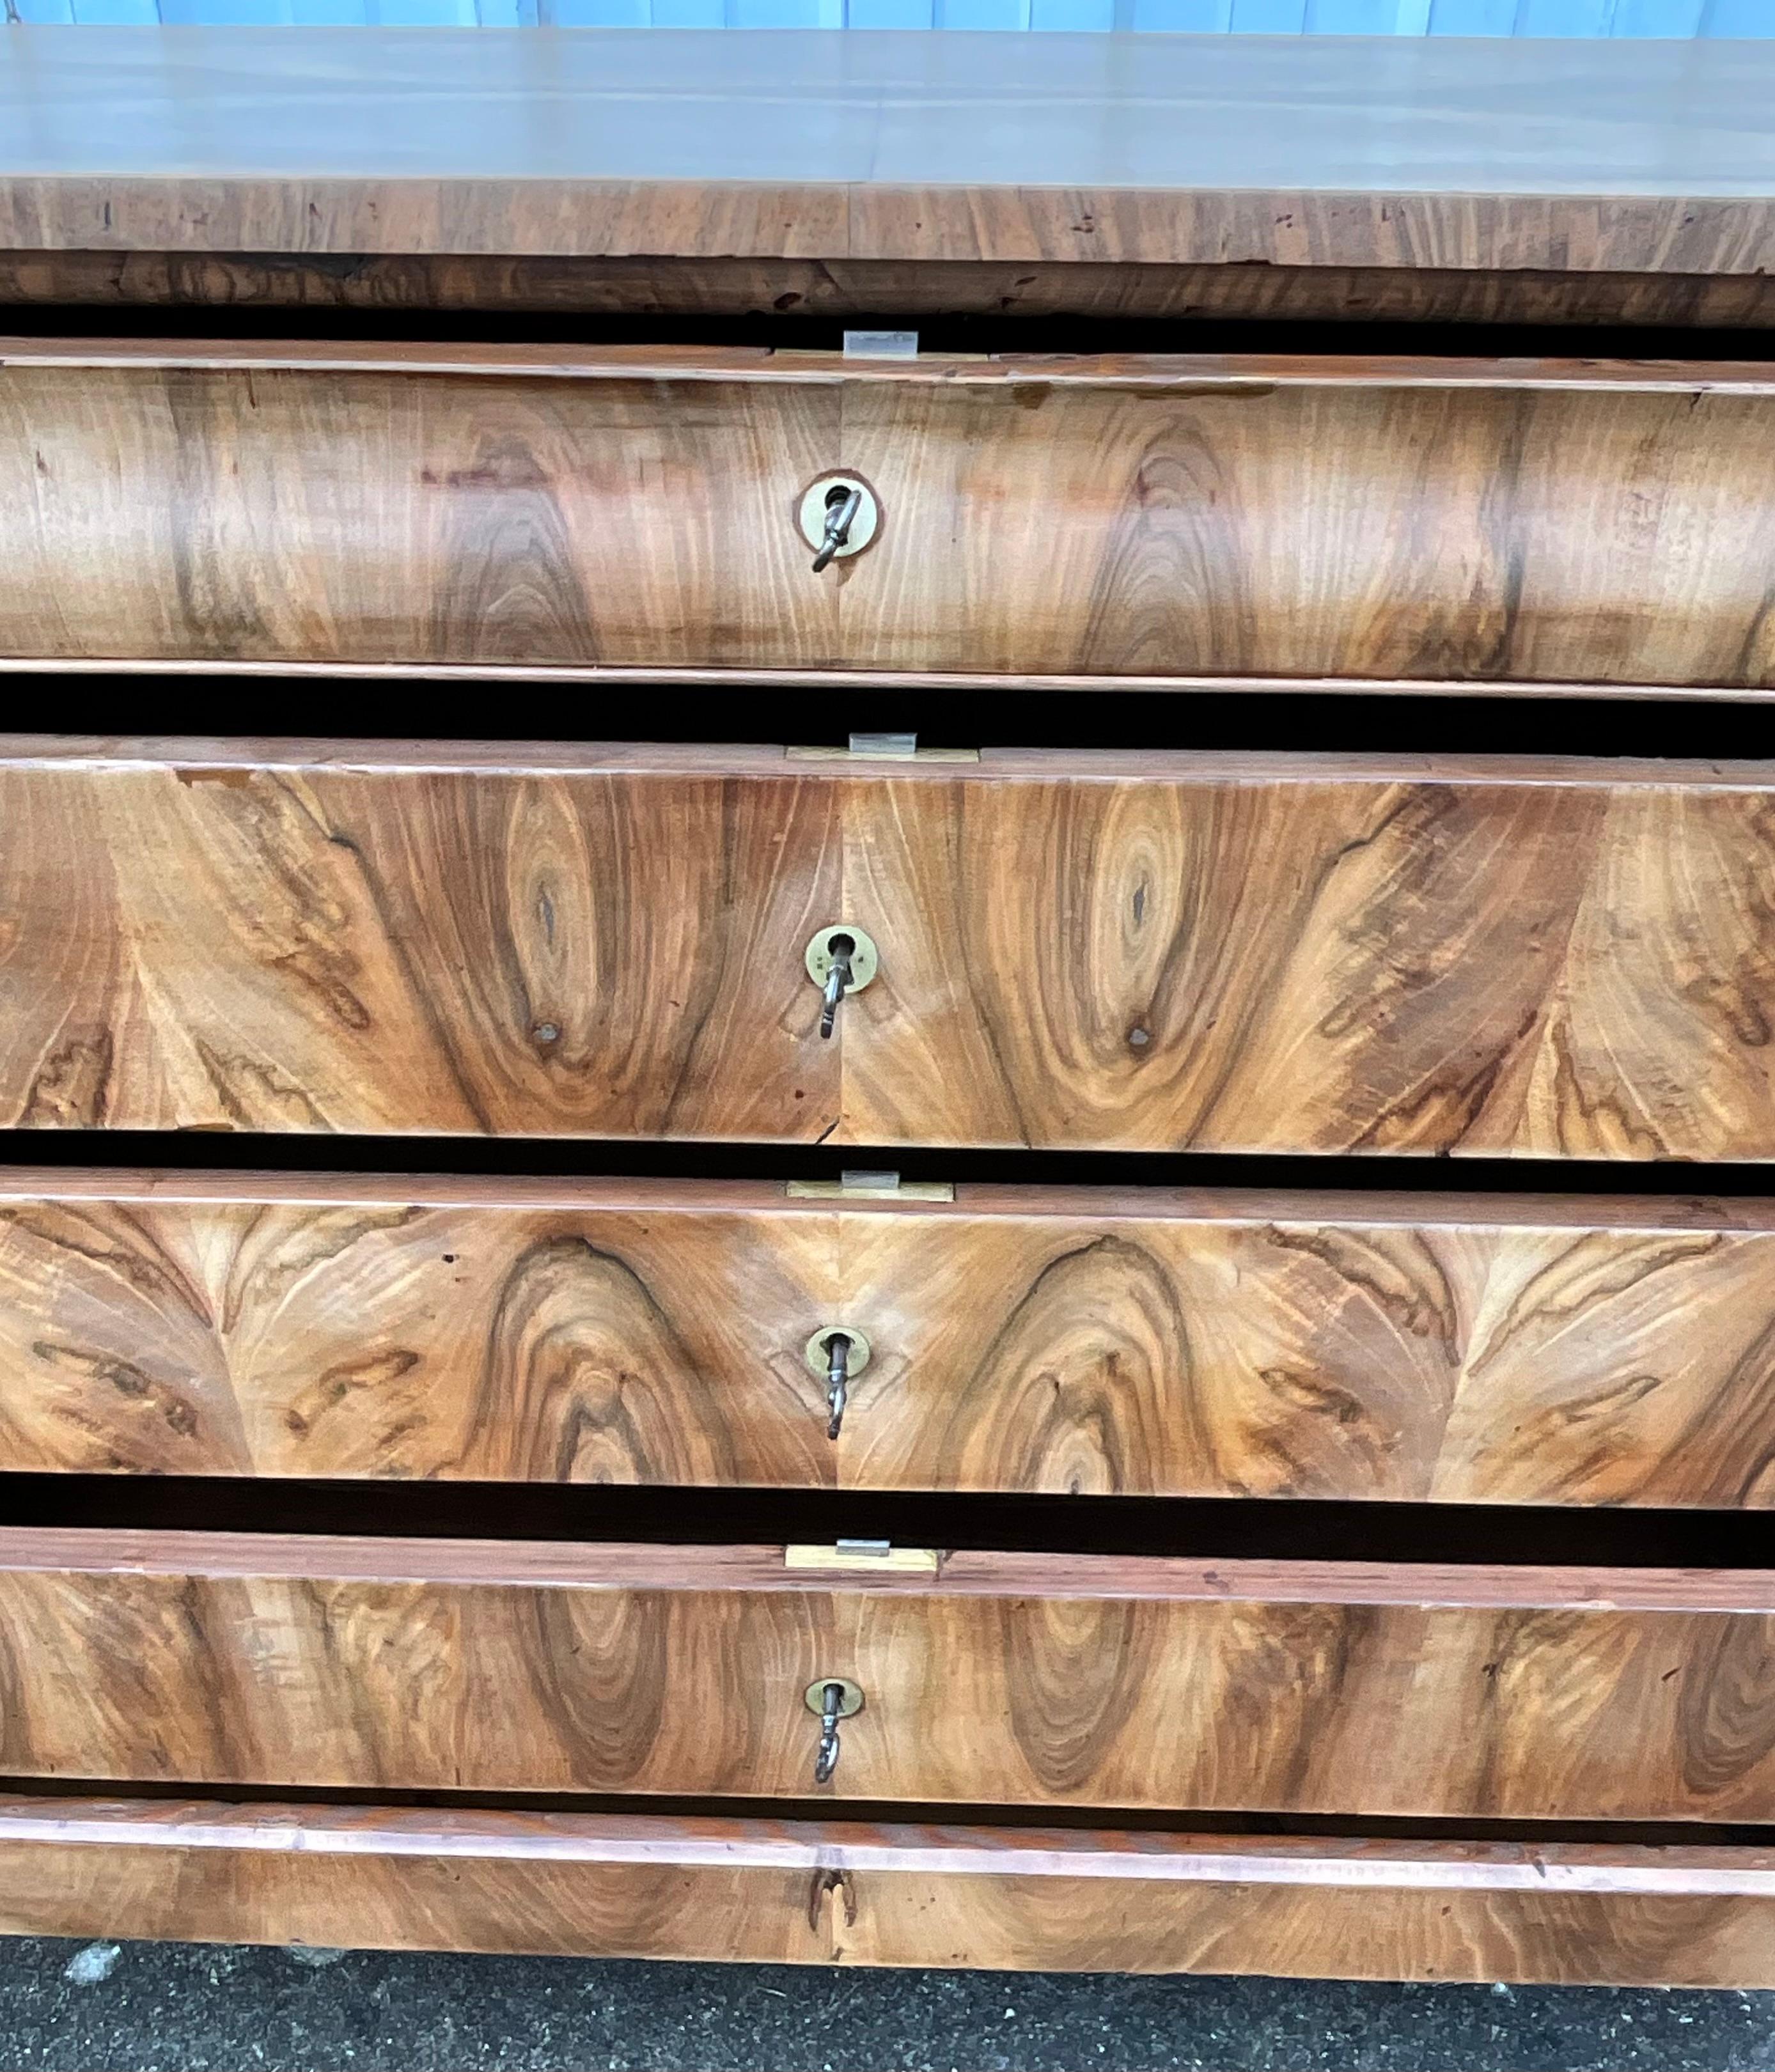 French chest of drawers Louis Philippe mid 19th century. The wood is of the bramble of walnut.

Walnut brambles are flamed because they have many aesthetic designs. These drawings have complex, highly contrasting patterns and intricate veins on a